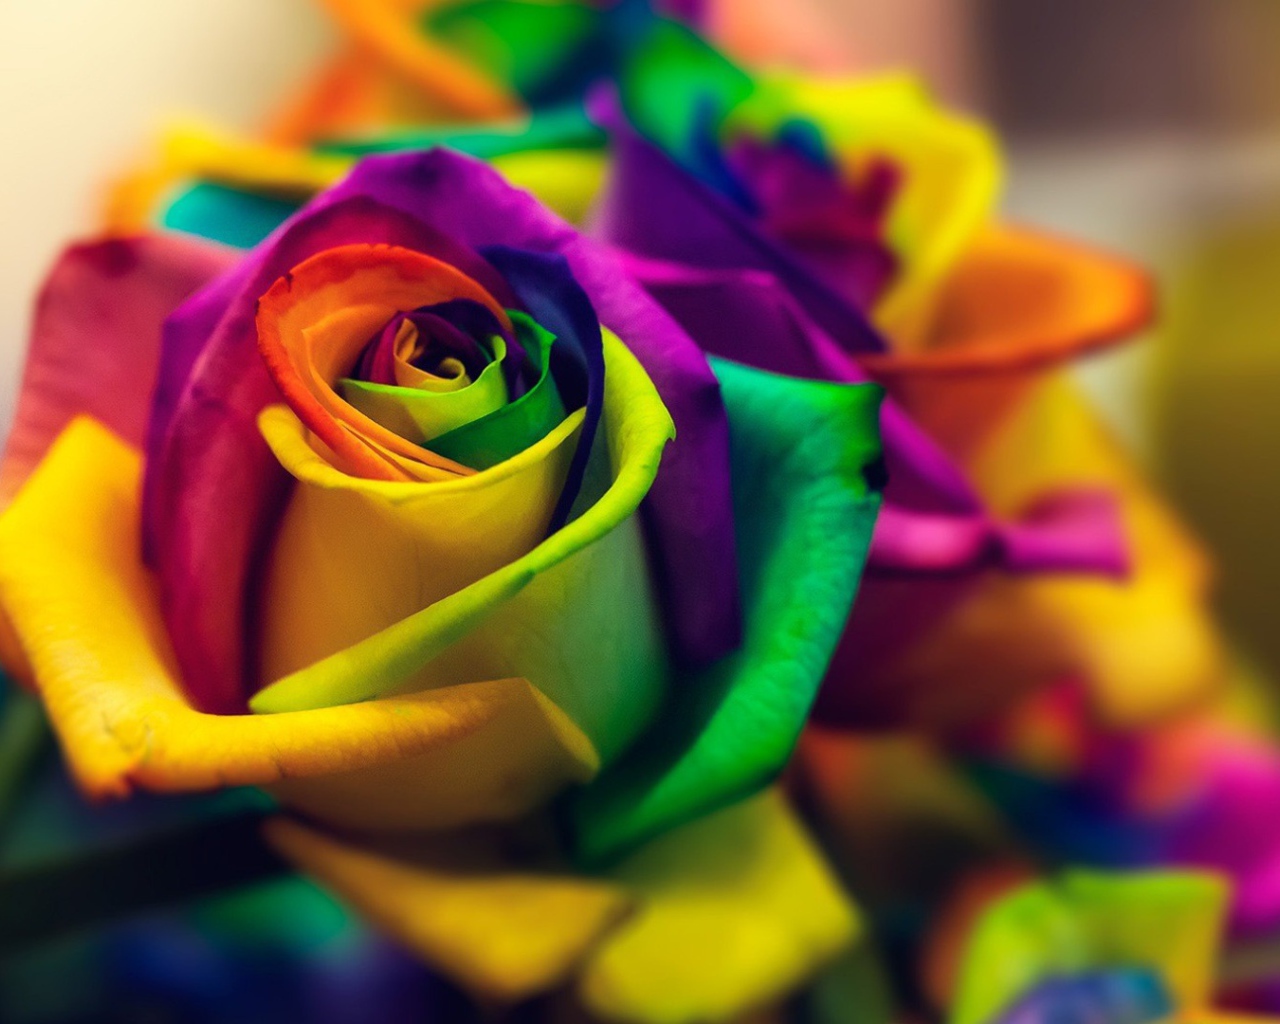 Bright rose with petals of different colors